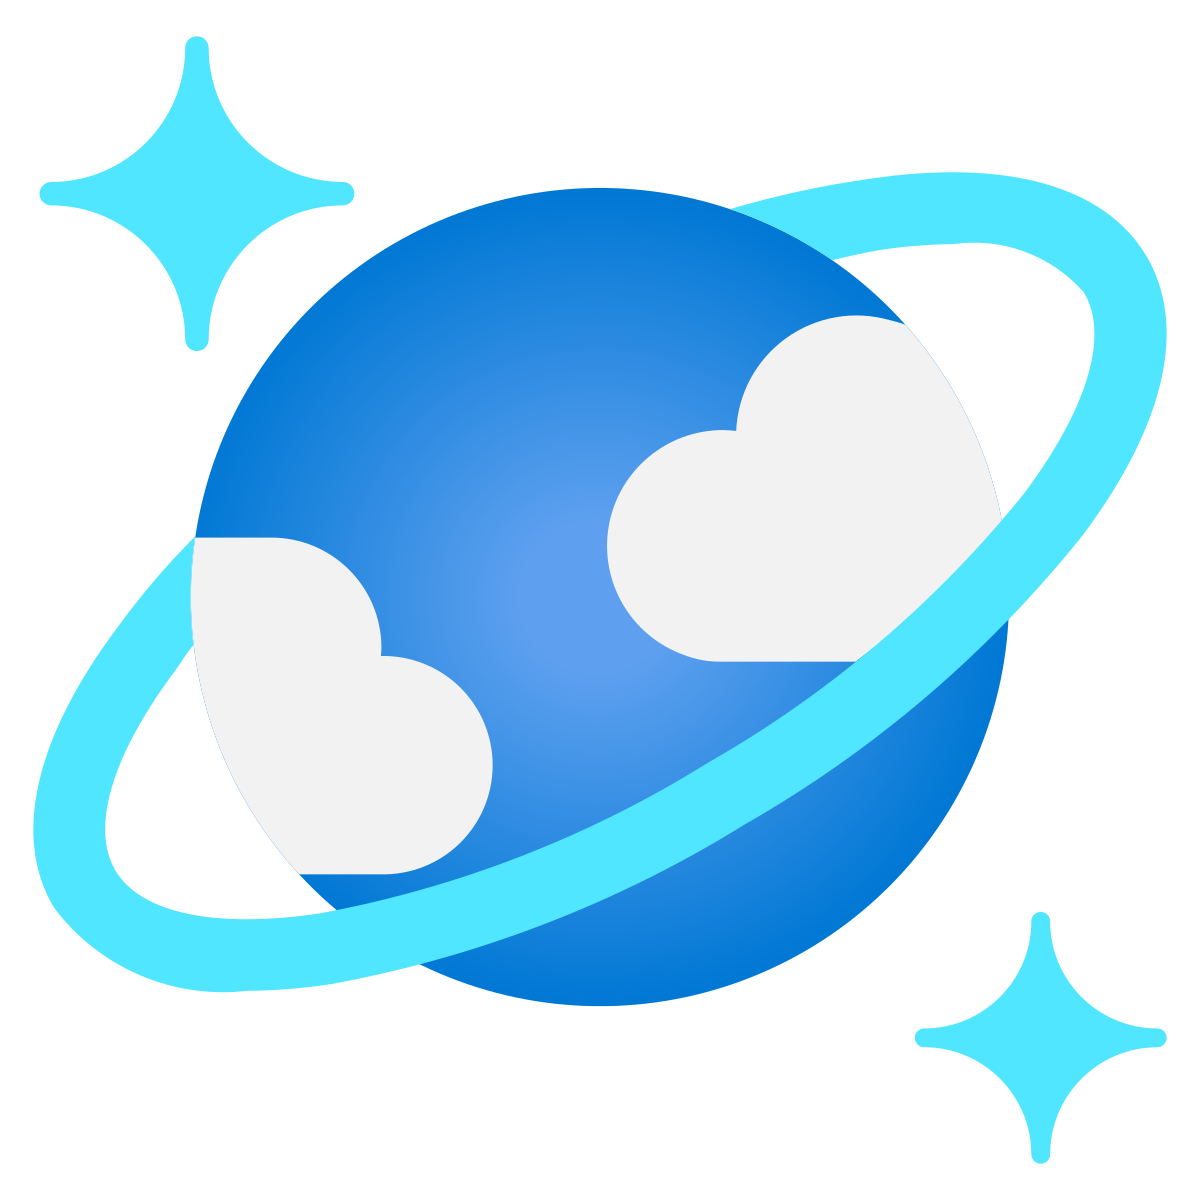 The Azure Cosmos DB Conf call for speakers is now open!